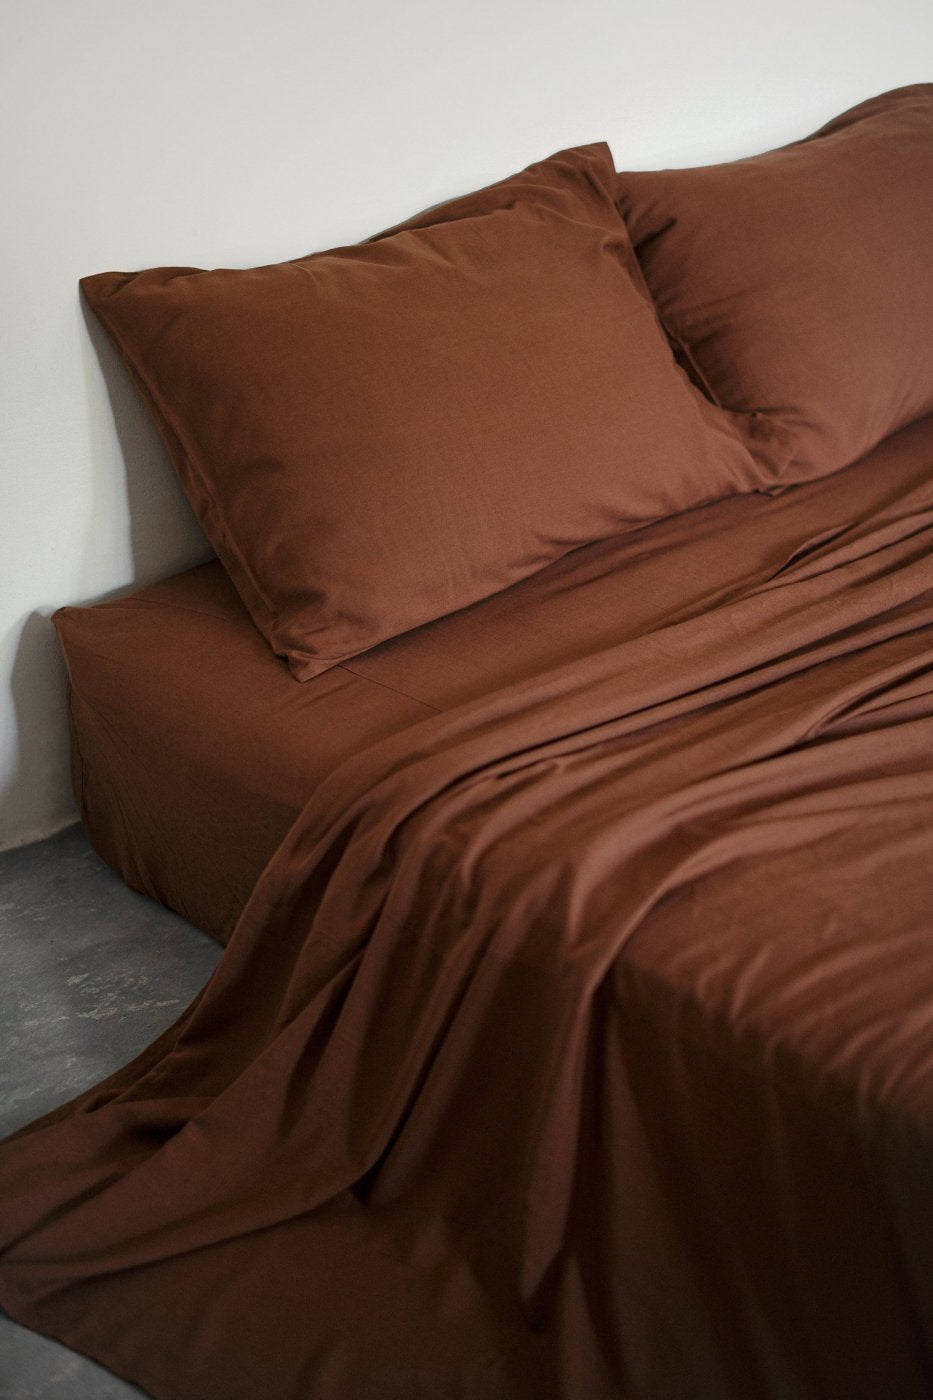 SUKU HOME "FITTED SHEET / CHOC"